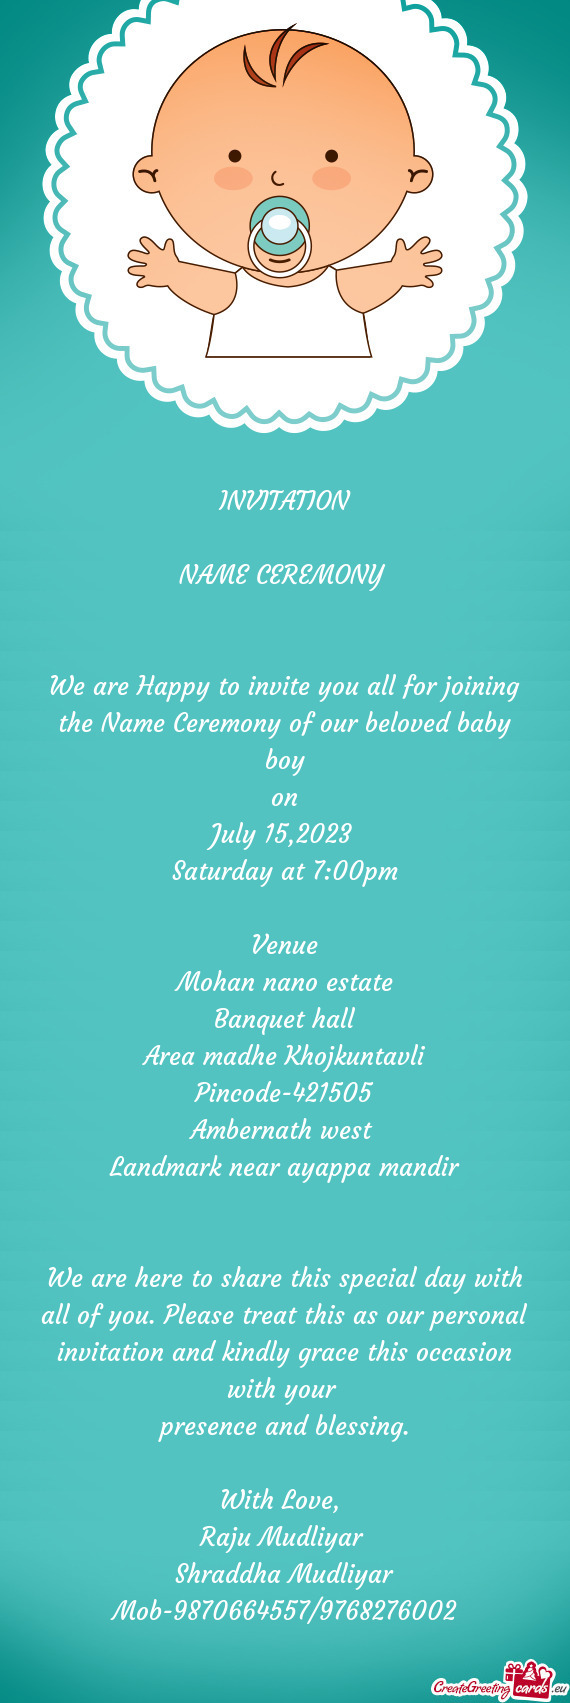 We are Happy to invite you all for joining the Name Ceremony of our beloved baby boy